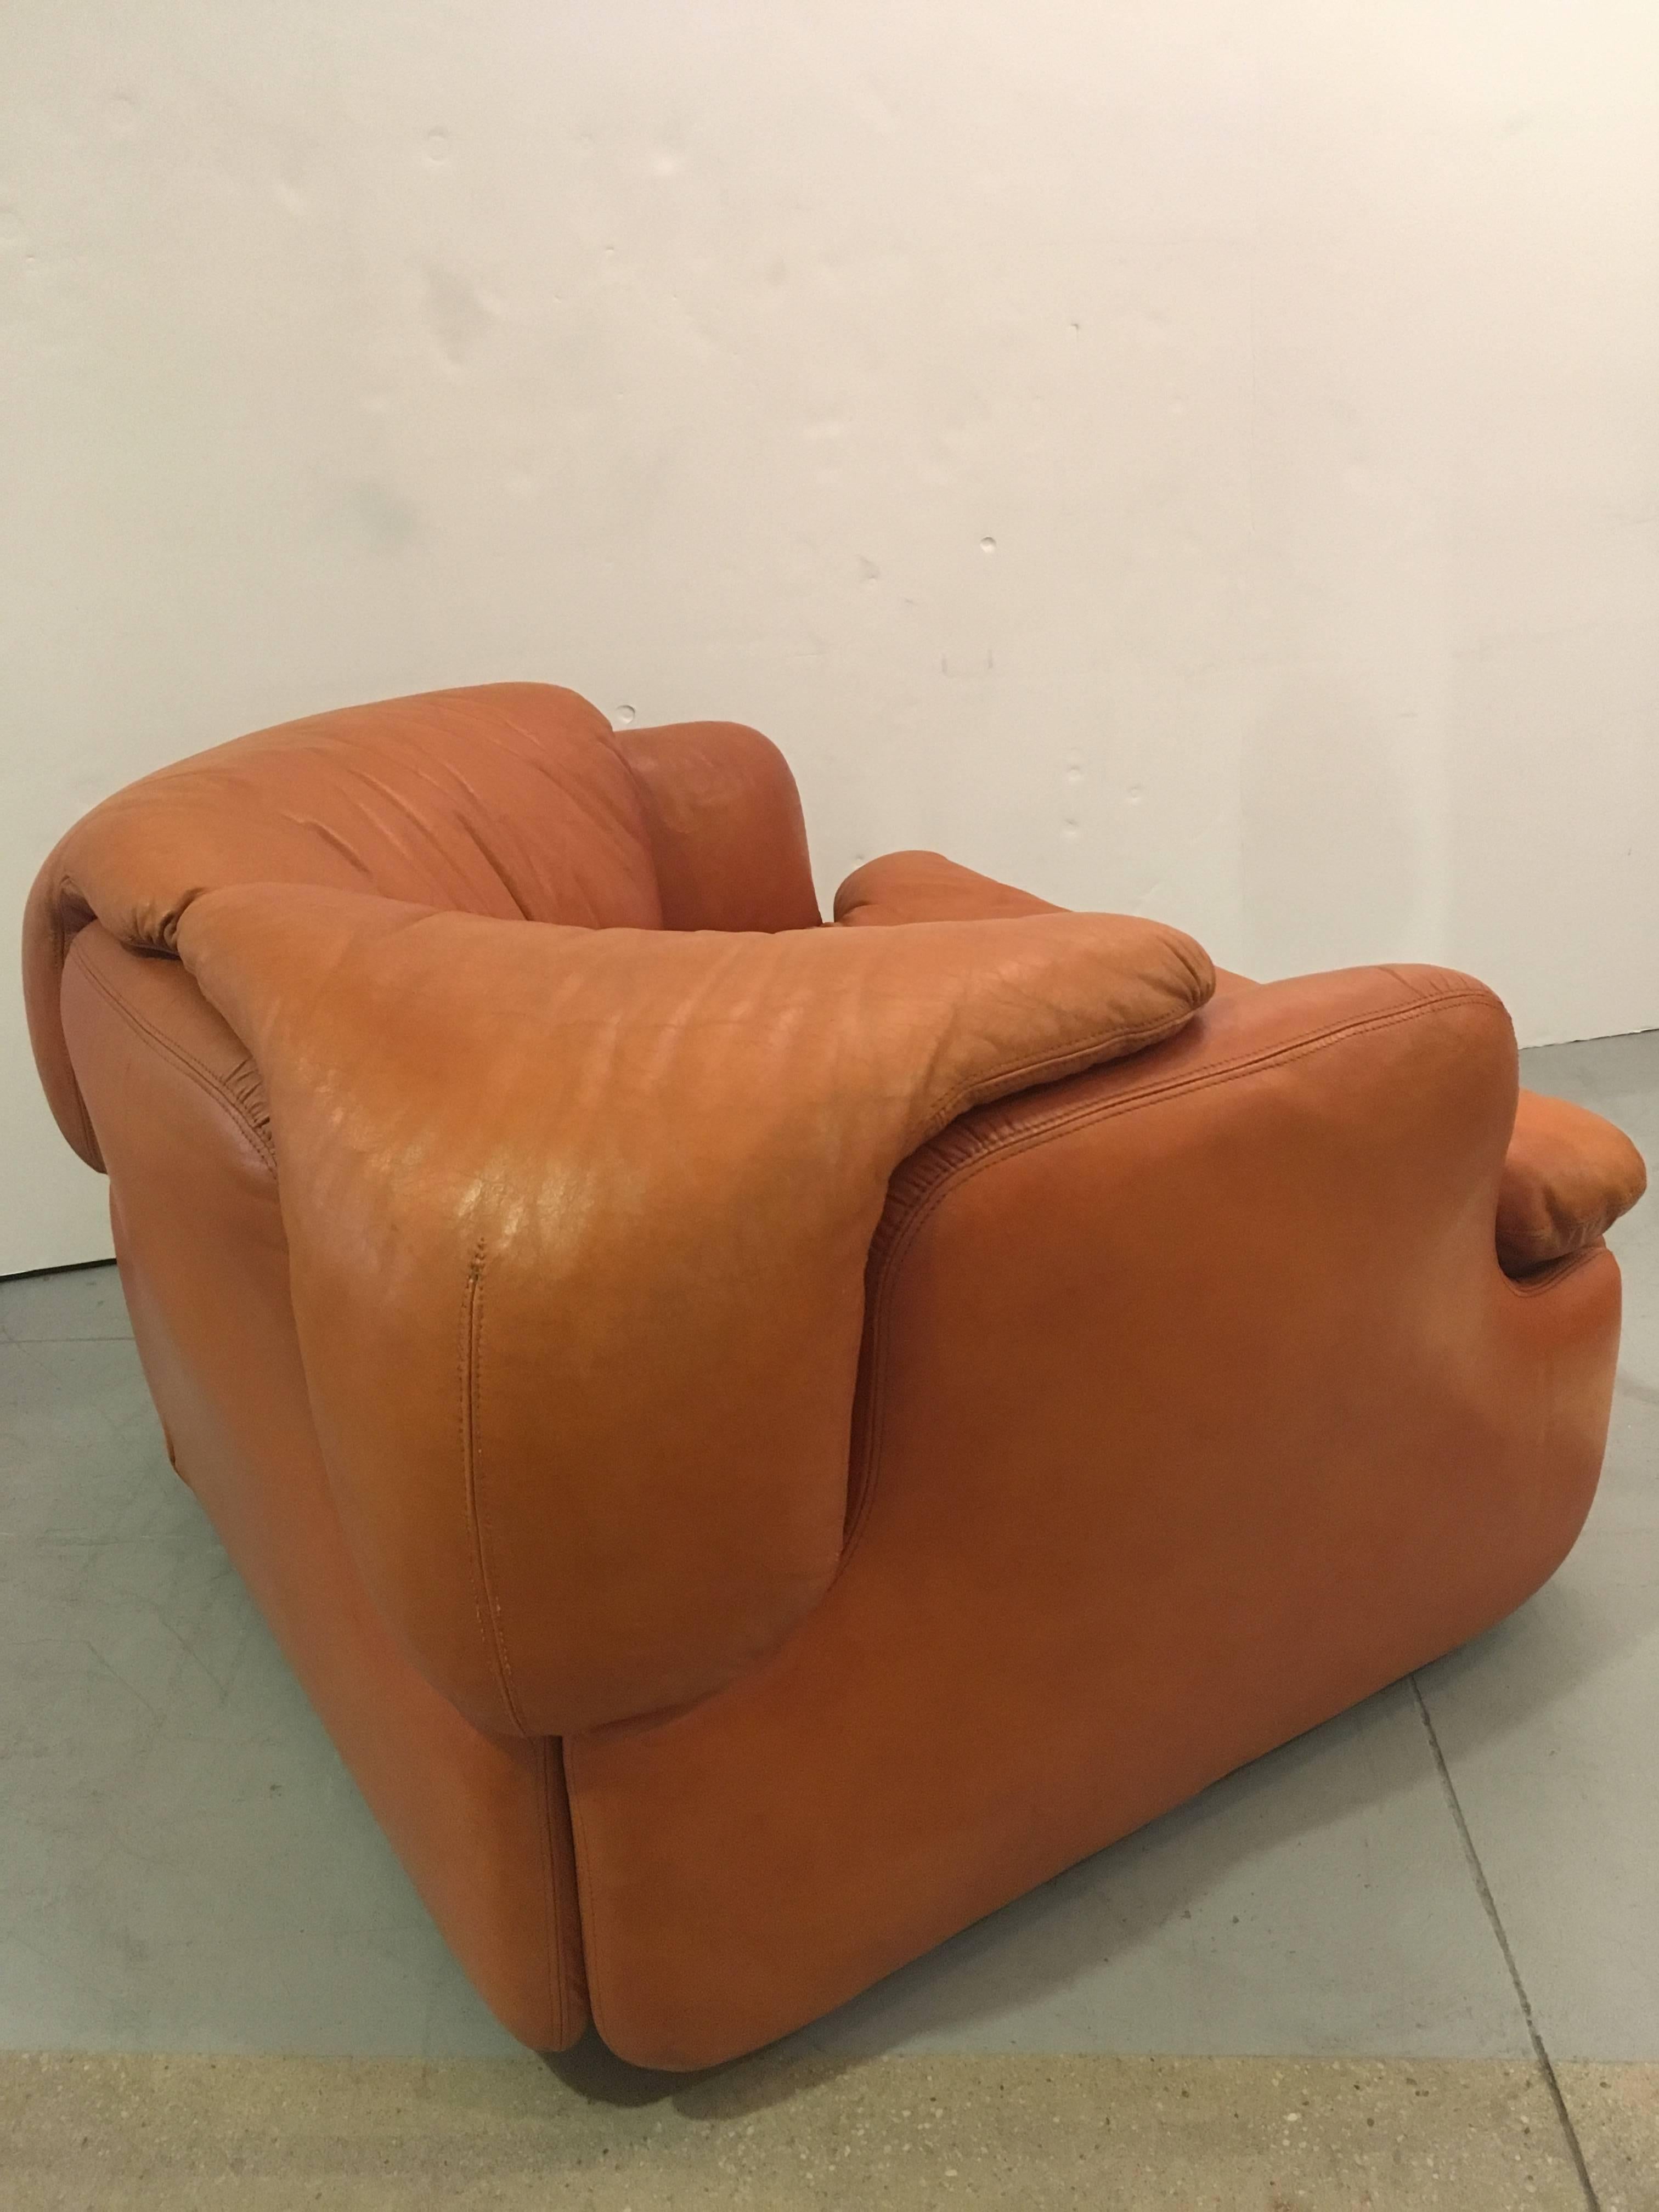 One leather armchair designed by the Alberto Rosselli. The chair is so inviting, so comfortable and in great shape for it age. The unique design of the cushions which nestle in the frame make it a work of art. The leather is in great shape with no